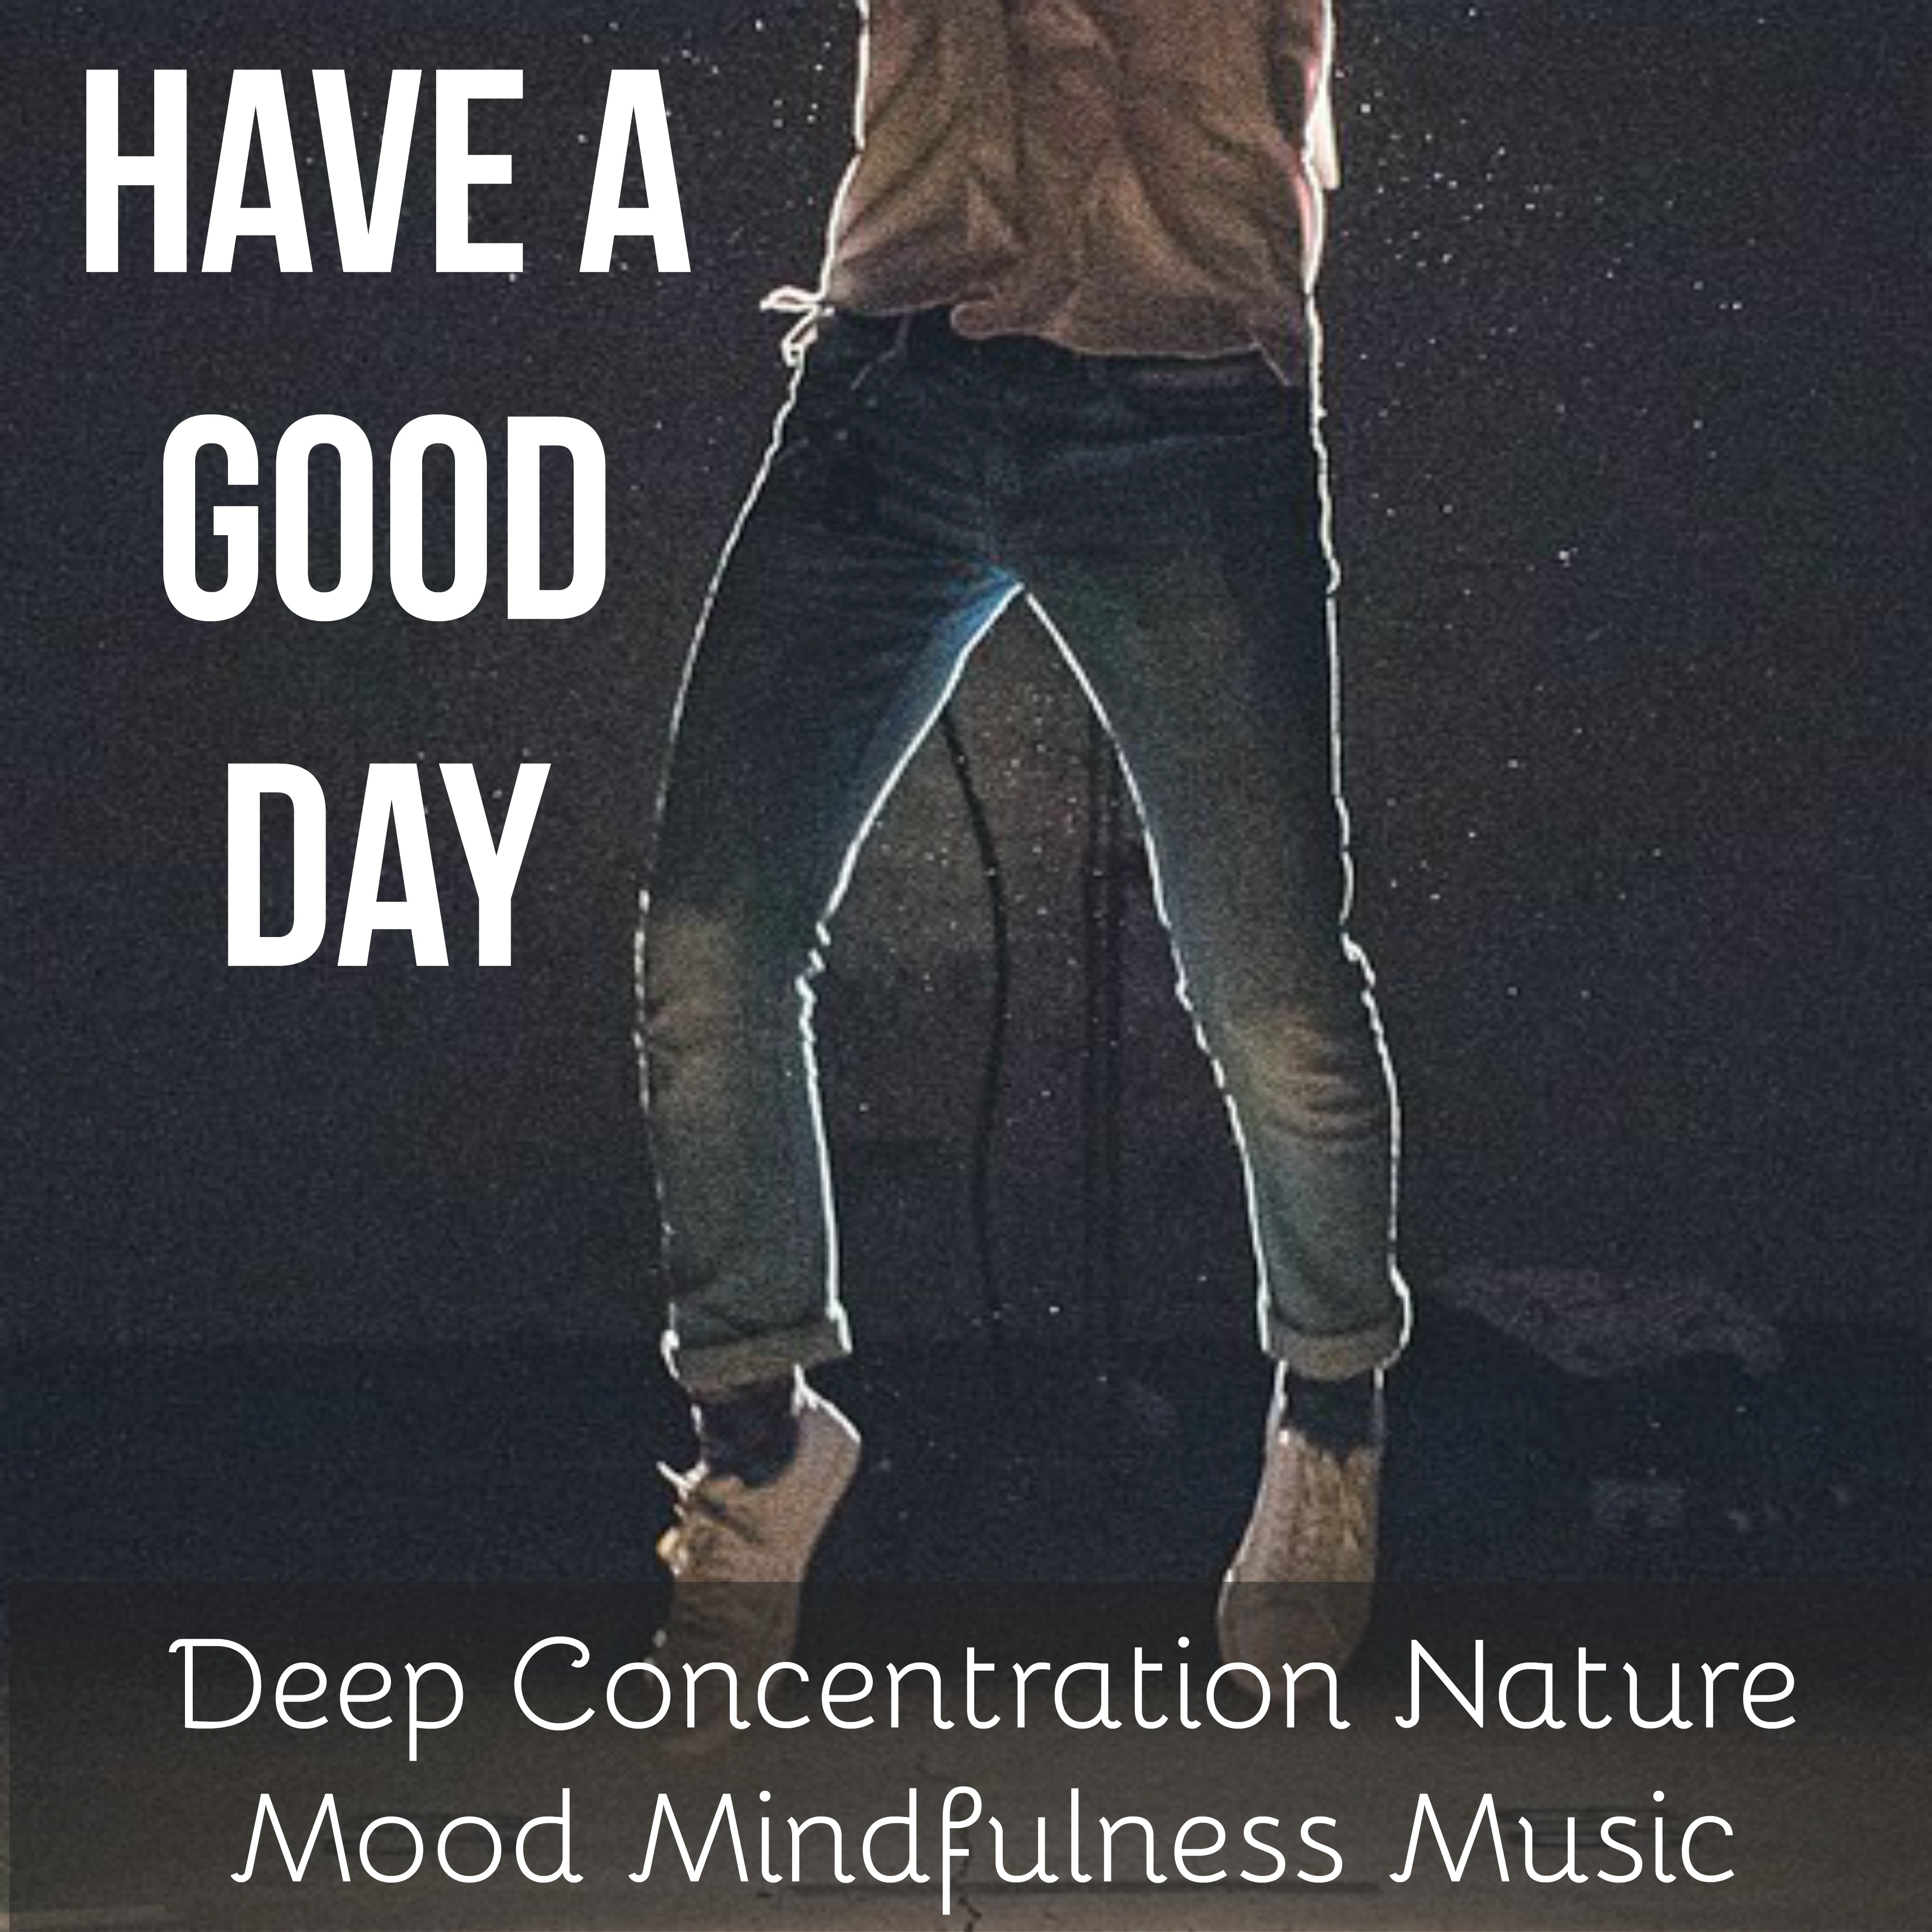 Have A Good Day - Deep Concentration Nature Mood Mindfulness Music for Emotion Recognition Biofeedback Training Problem Solving with Instrumental New Age Relaxing Sounds